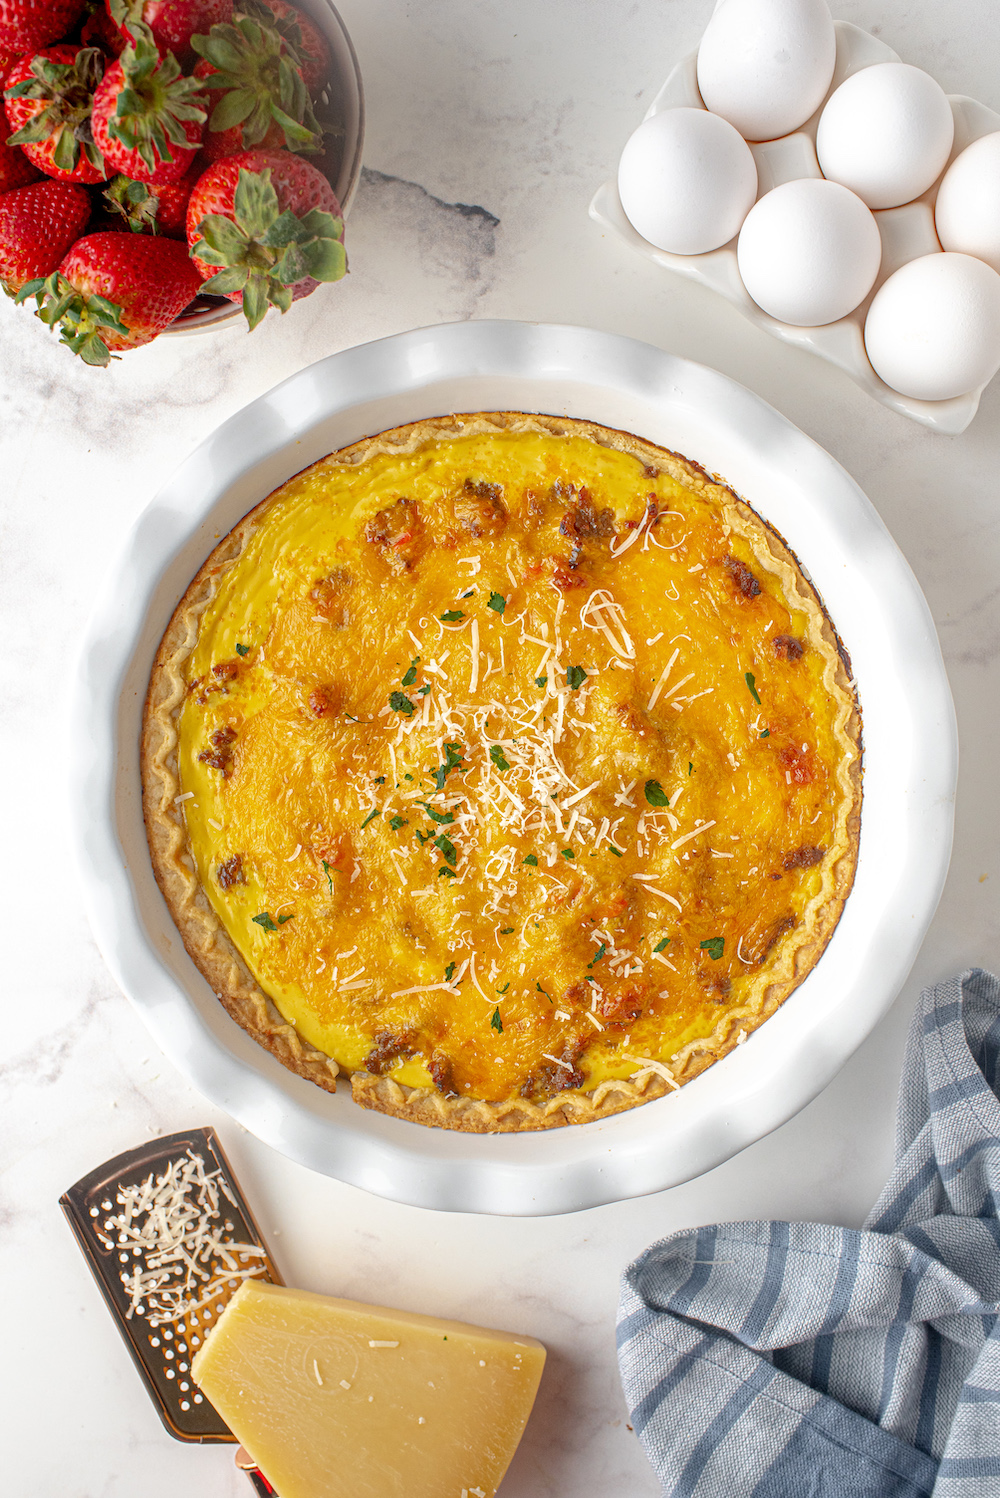 Sausage and Red Pepper Quiche in white dish with eggs and strawberries